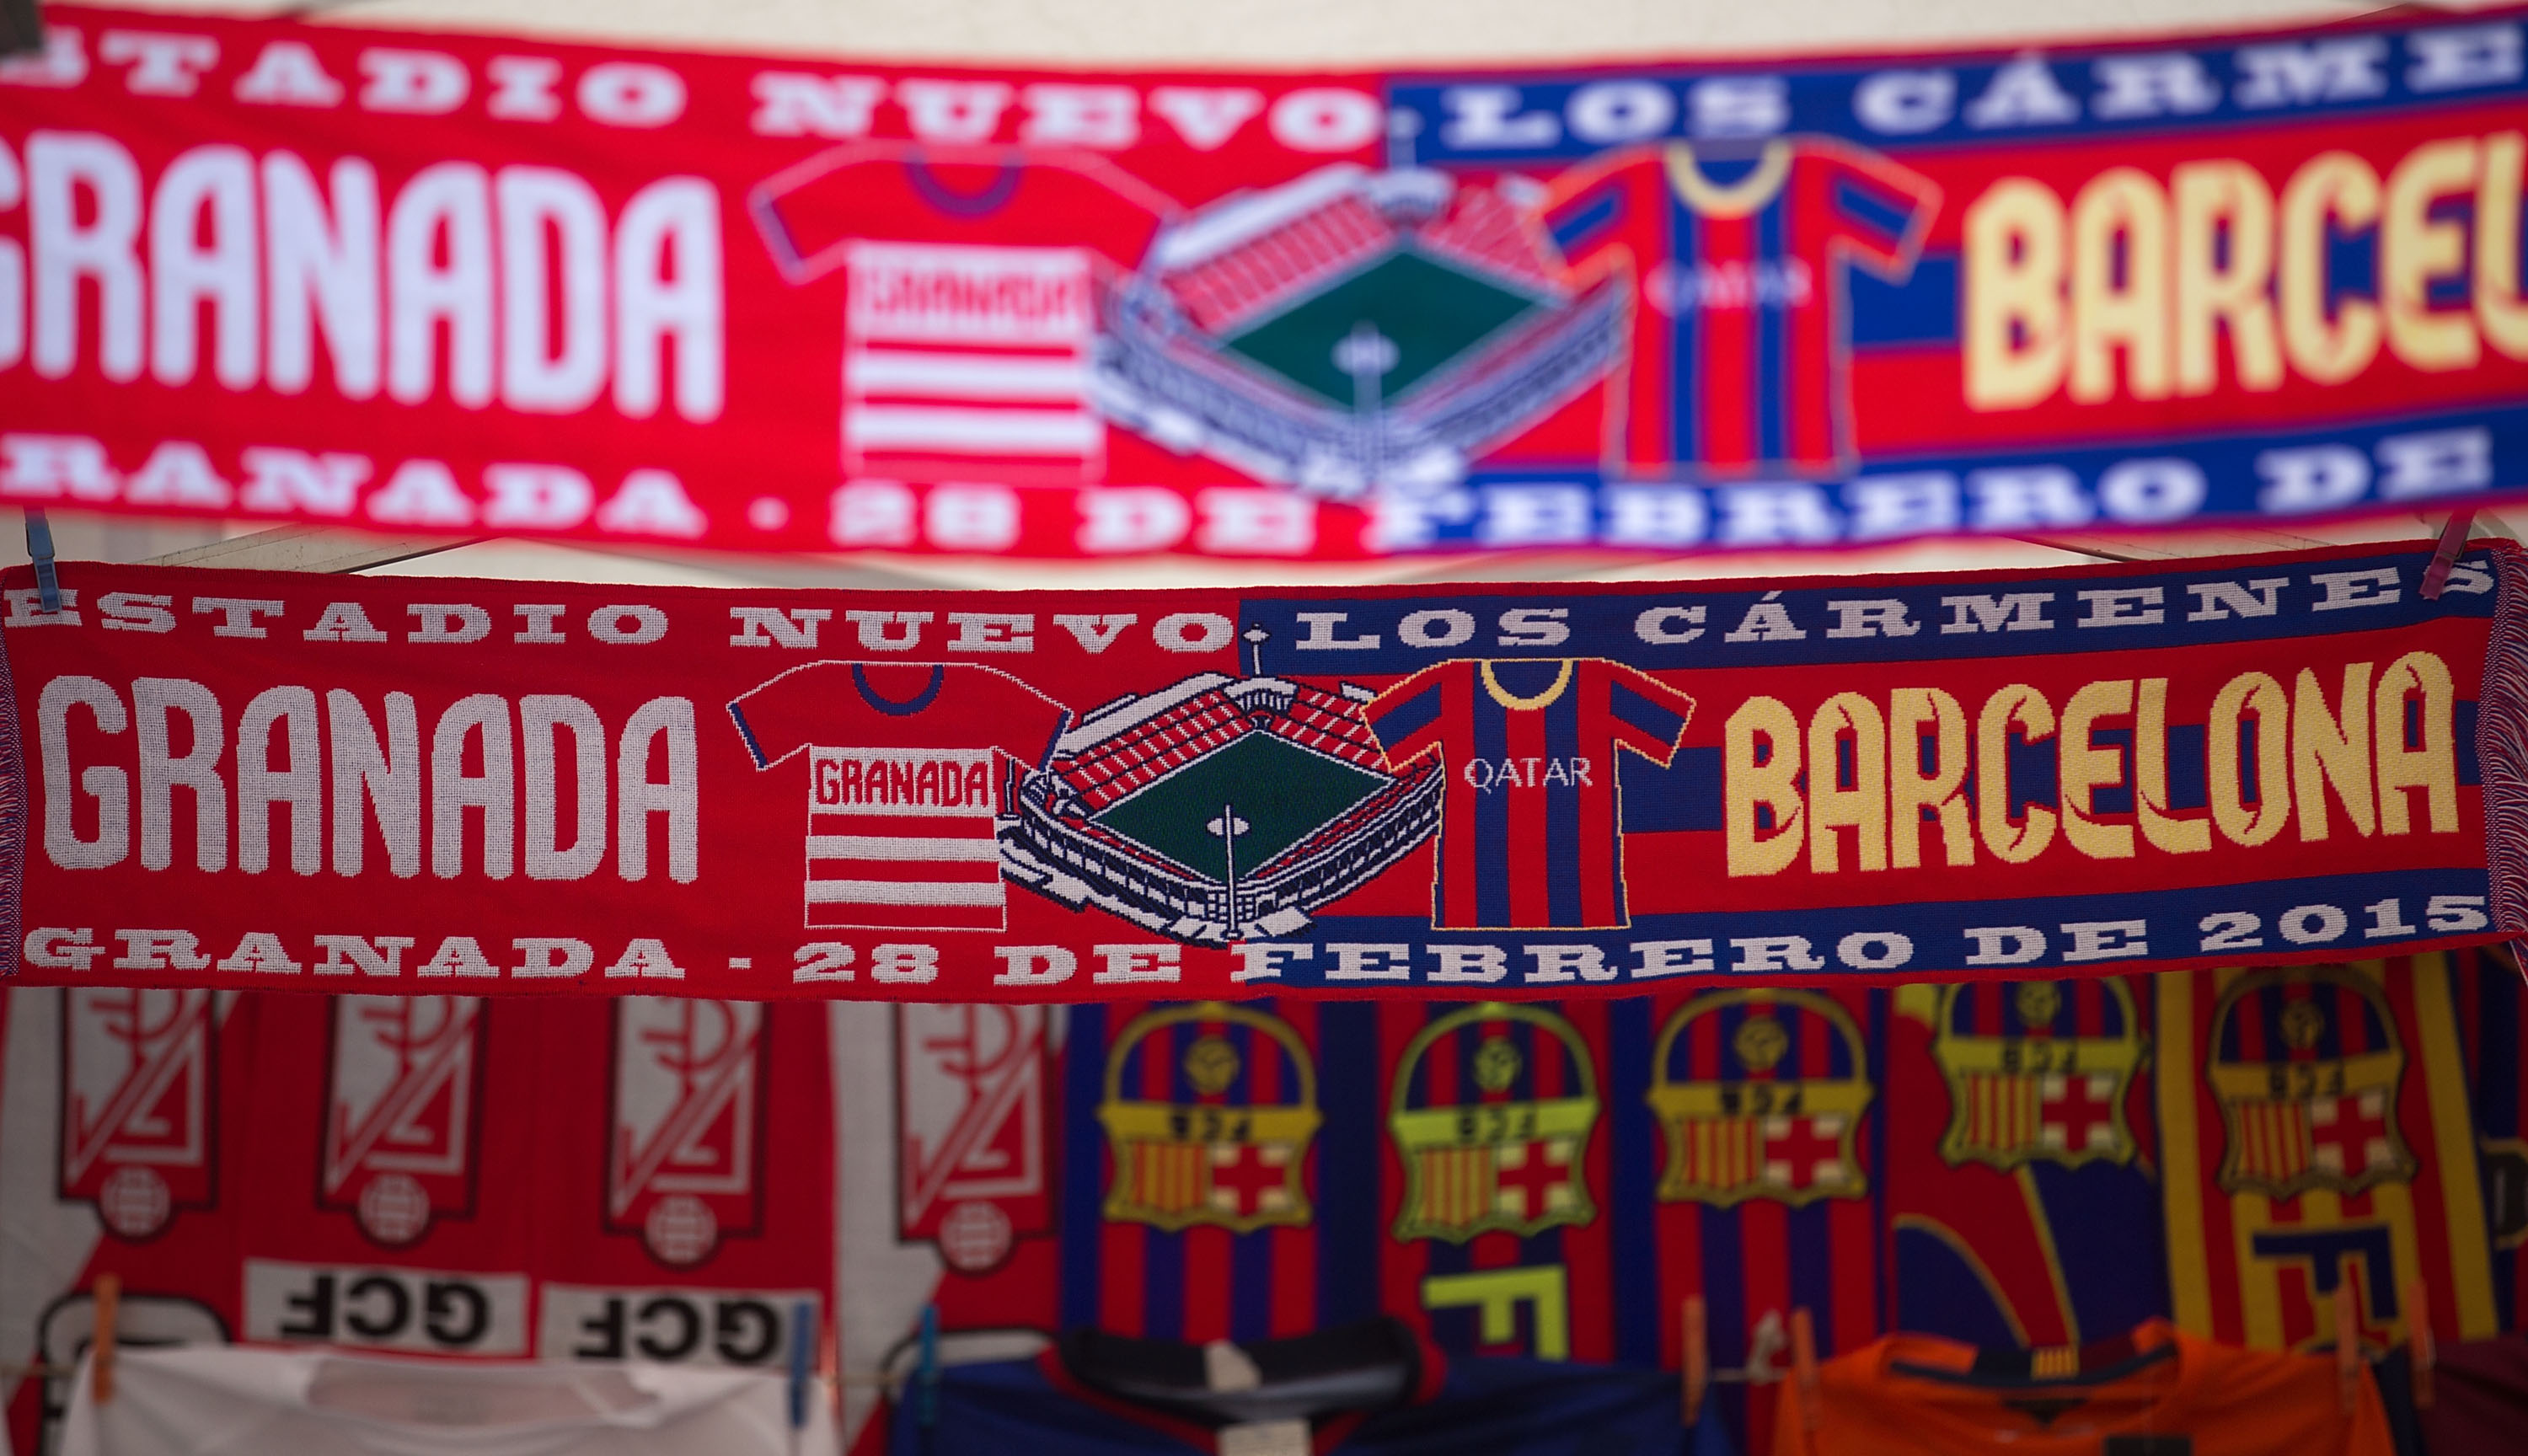 GRANADA, SPAIN - FEBRUARY 28: The Match,s scarf  is displayed at a merchandaising stall outside Nuevo Estadio de los Carmenes before the La Liga match between Granada CF and FC Barcelona on February 28, 2015 in Granada, Spain.  (Photo by Gonzalo Arroyo Moreno/Getty Images)